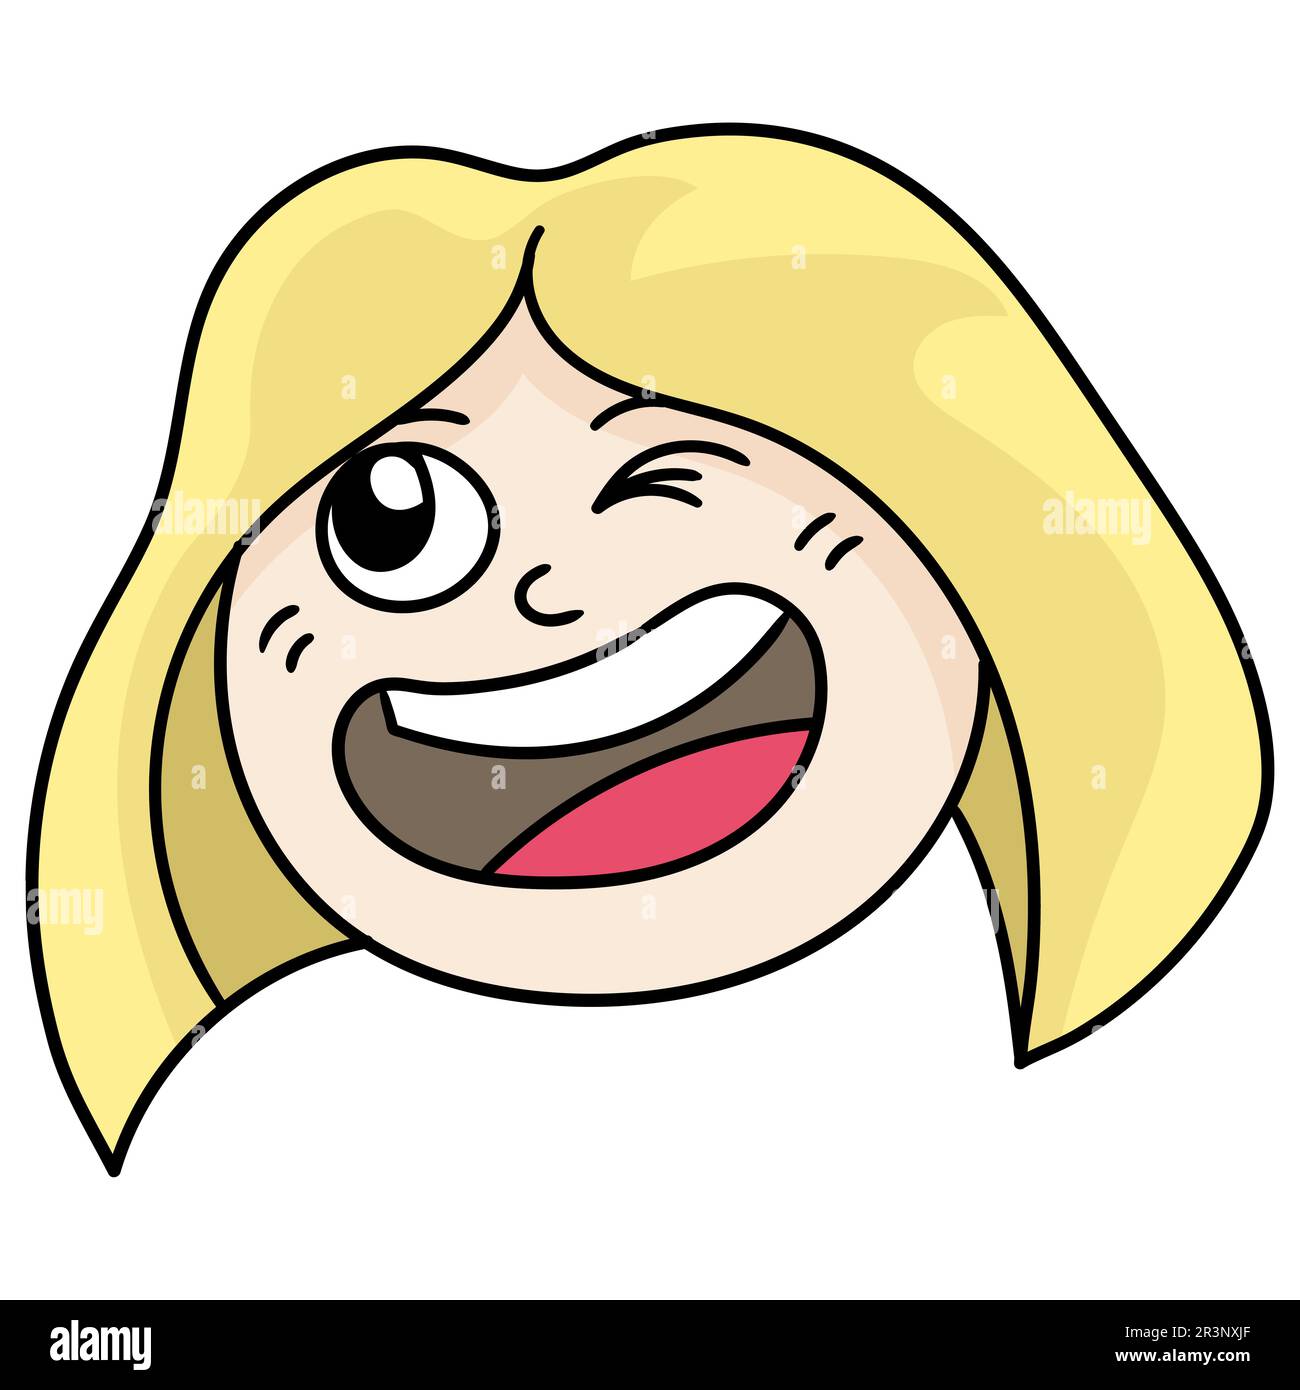 Emoticon head blonde woman laughing happily. doodle icon image Stock Photo